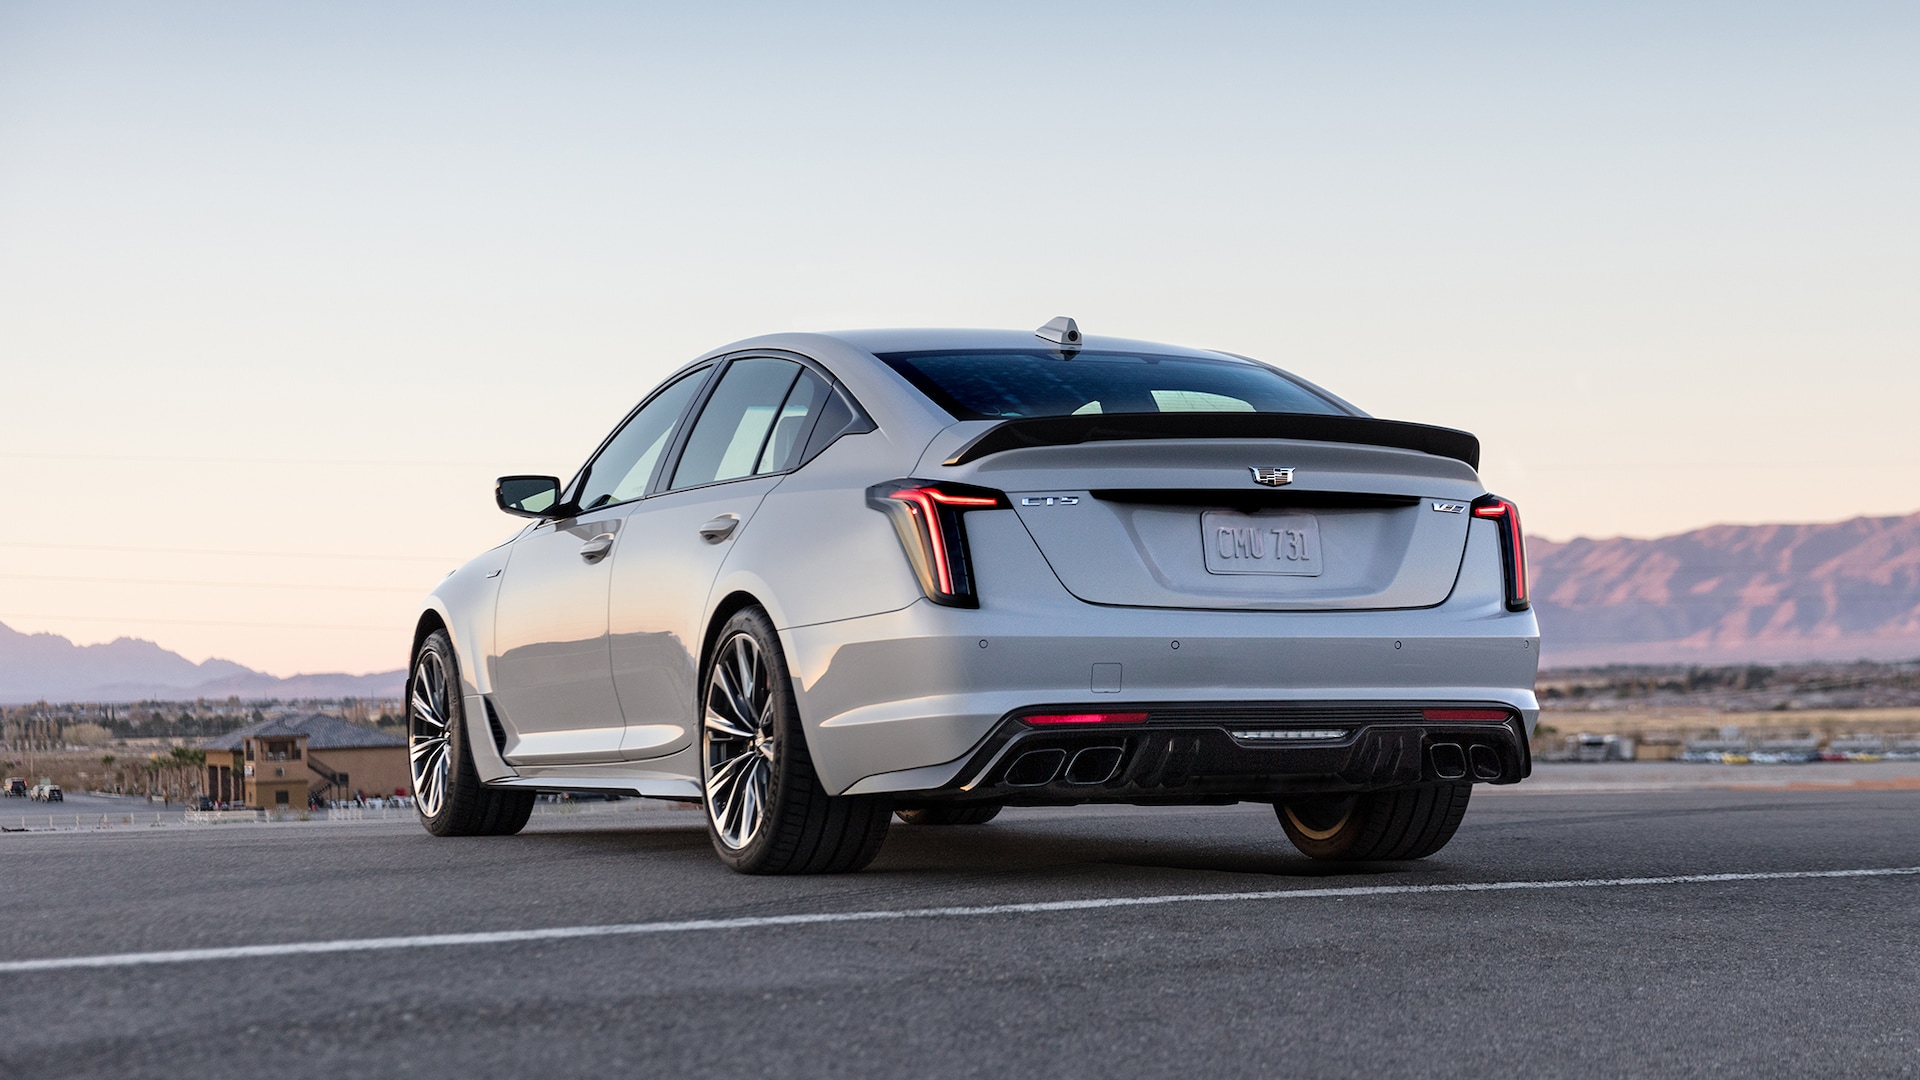 2022 Cadillac CT5 Prices, Reviews, and Photos - MotorTrend